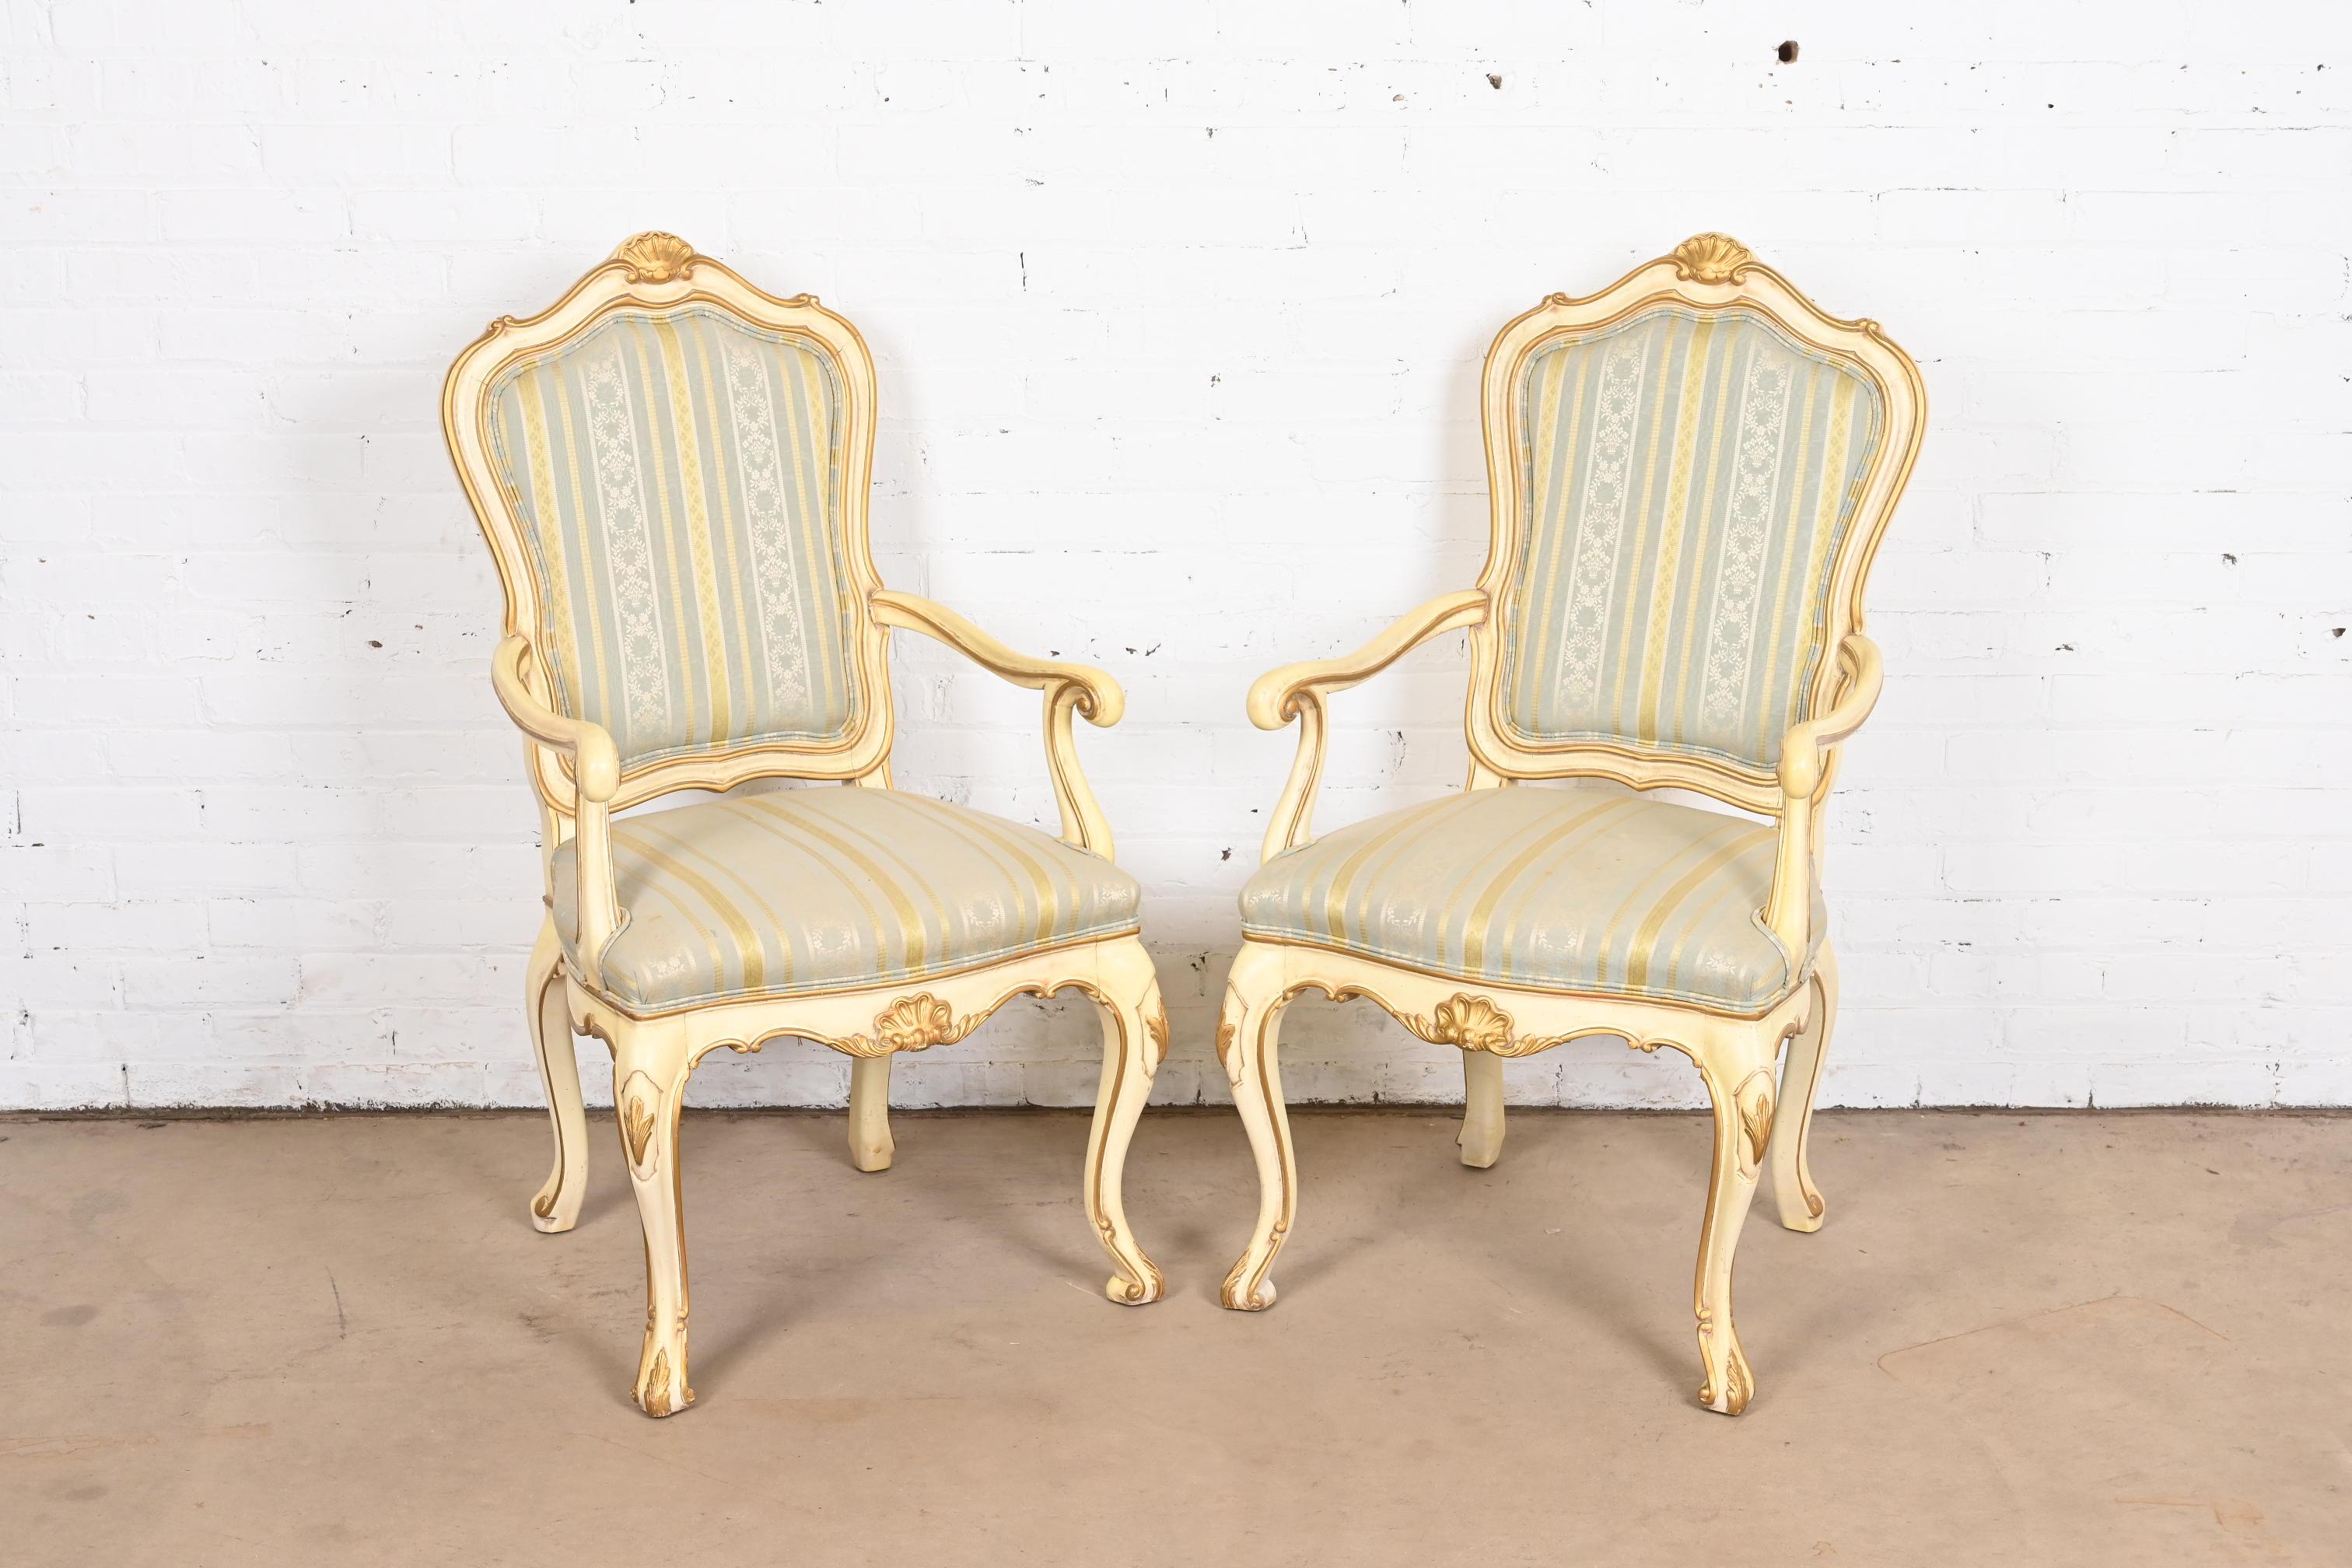 American Karges French Rococo Louis XV Cream Lacquered and Gold Gilt Fauteuils, Pair